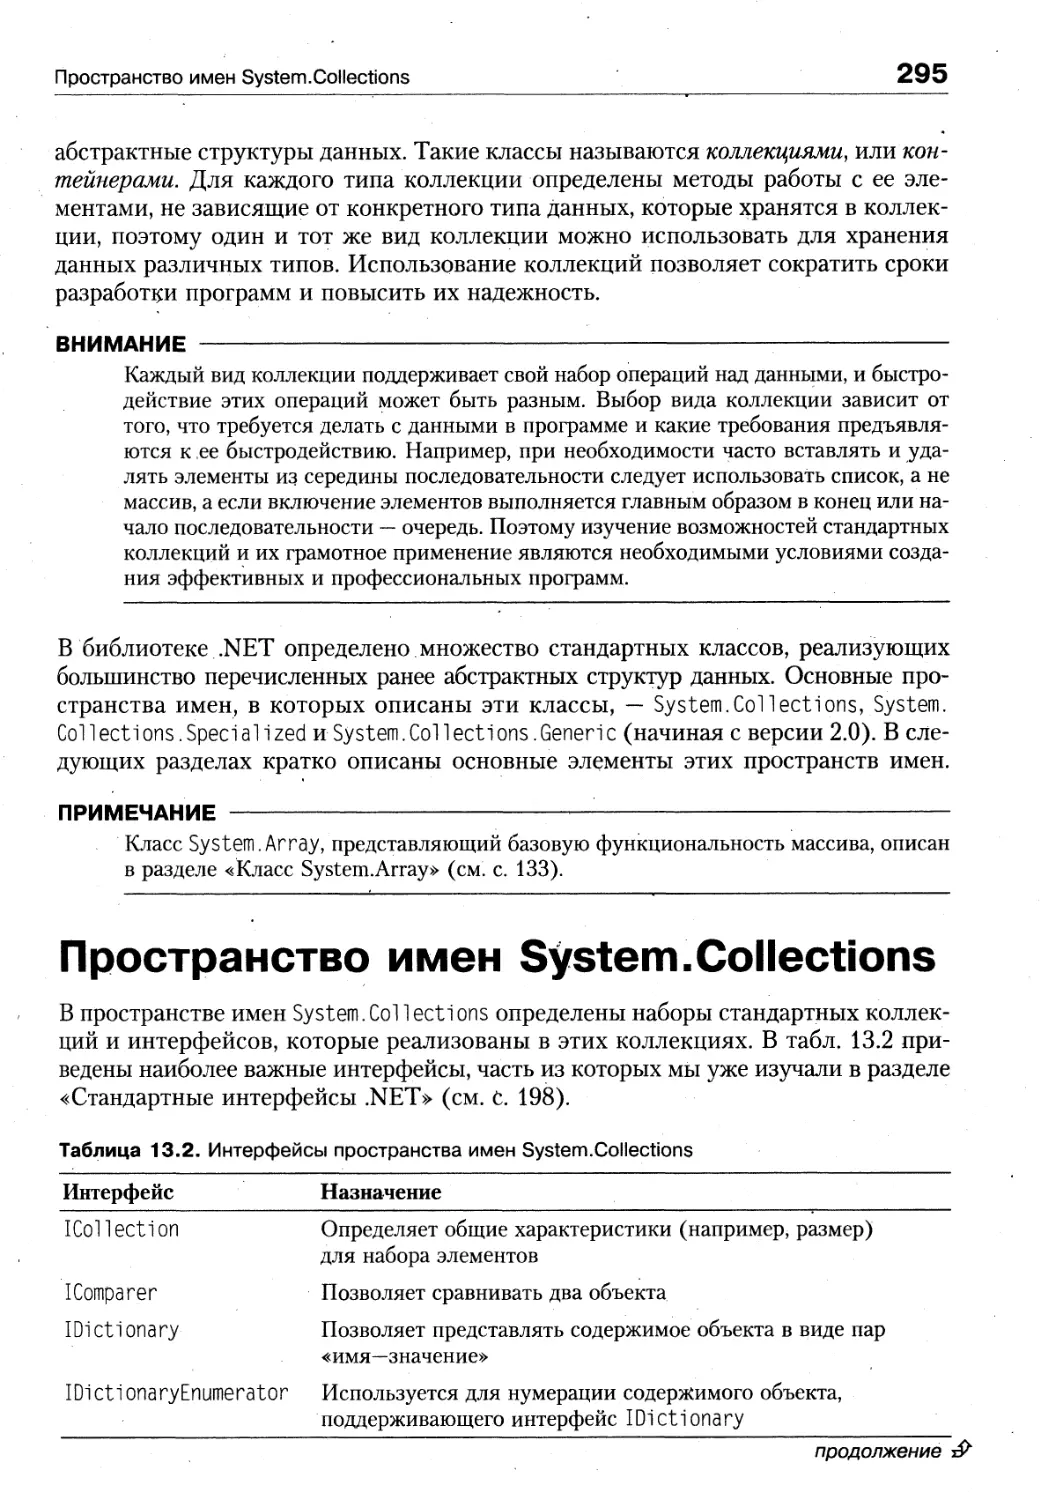 Пространство имен System.Collections